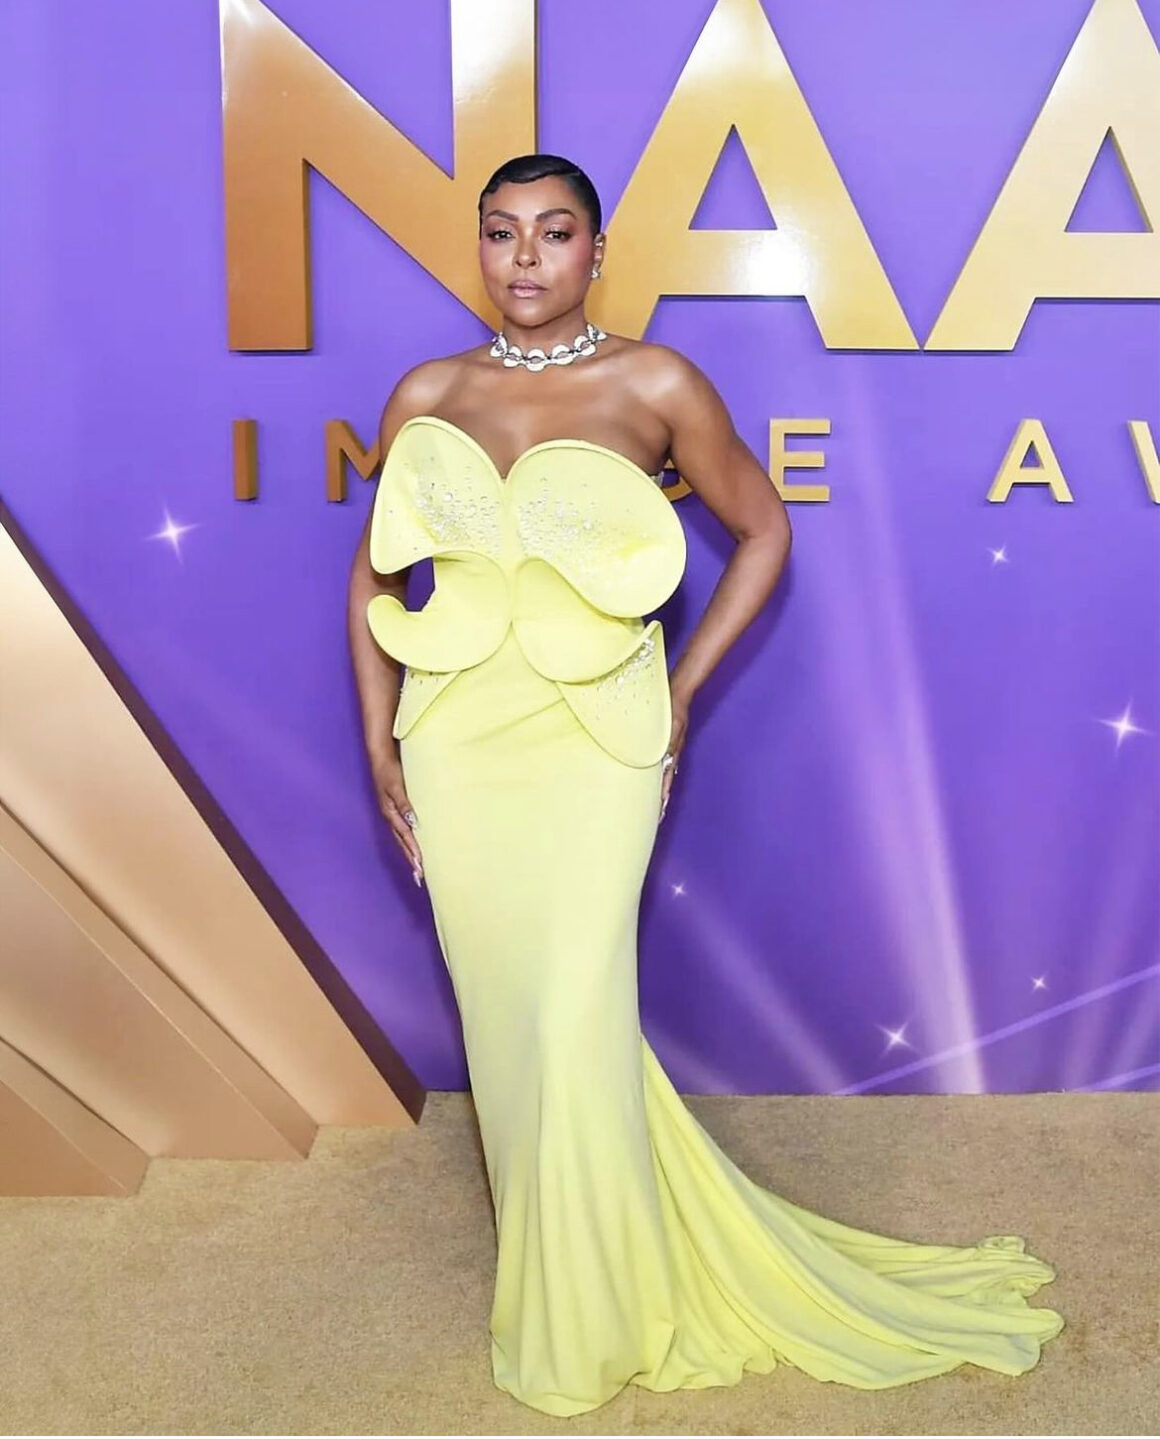 On the Scene at the 55th NAACP Image Awards Fantasia in Custom Mono Halley Bailey in Nicole Felicia Couture Tara Henson in Declare Tisha Campbell Martin in AnRfashions and More 15